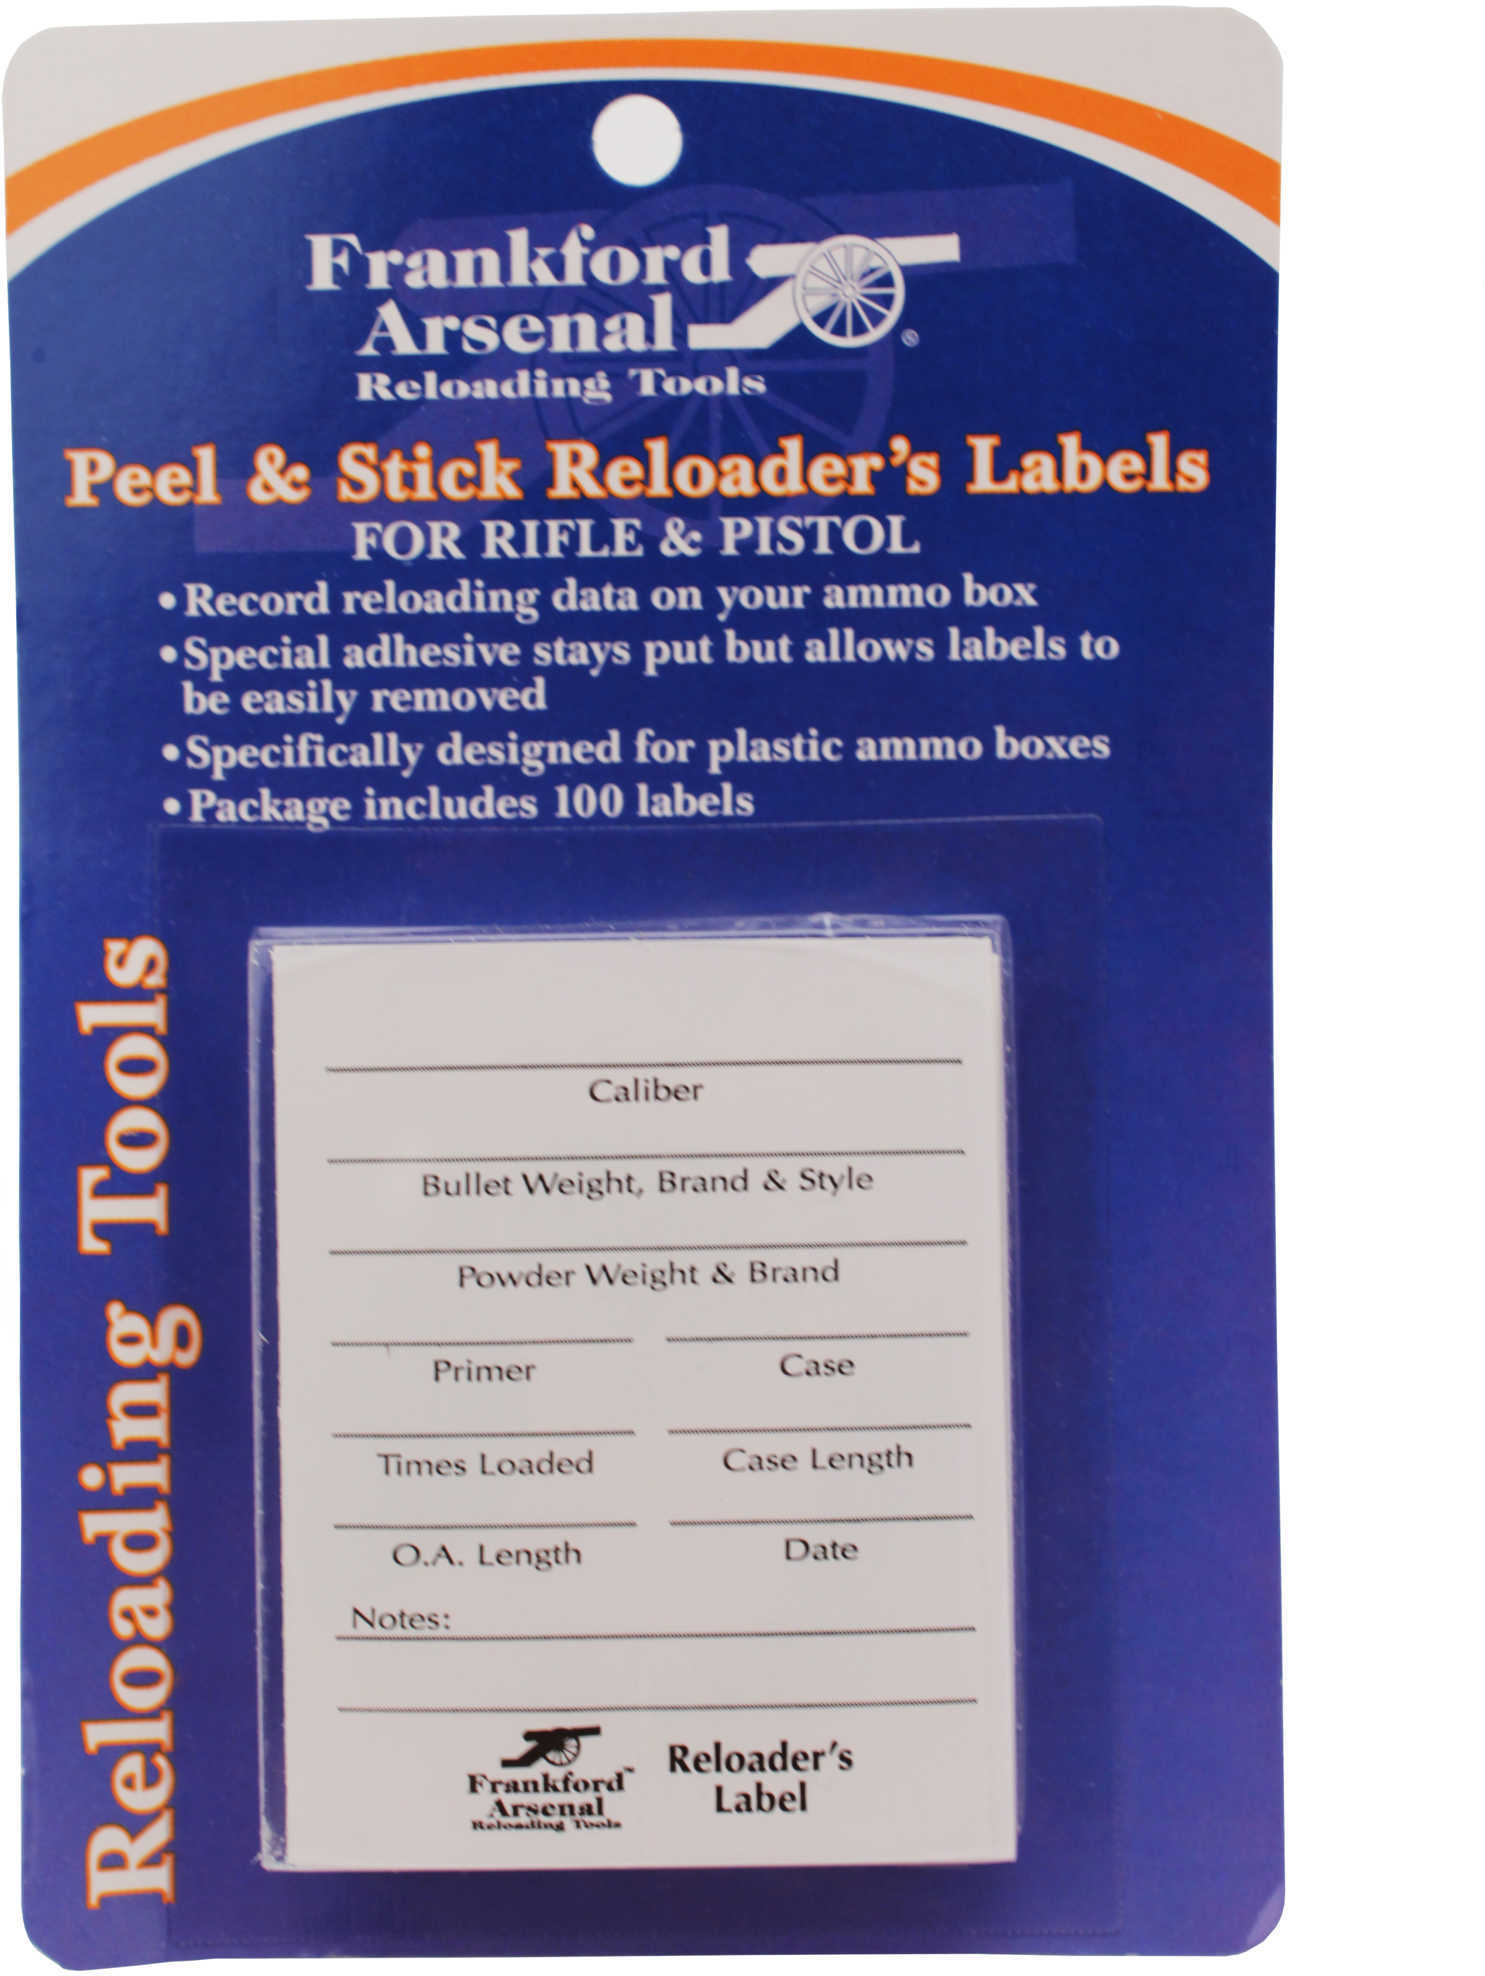 Frankford Arsenal Pistol and Rifle Reloader's Labels 100